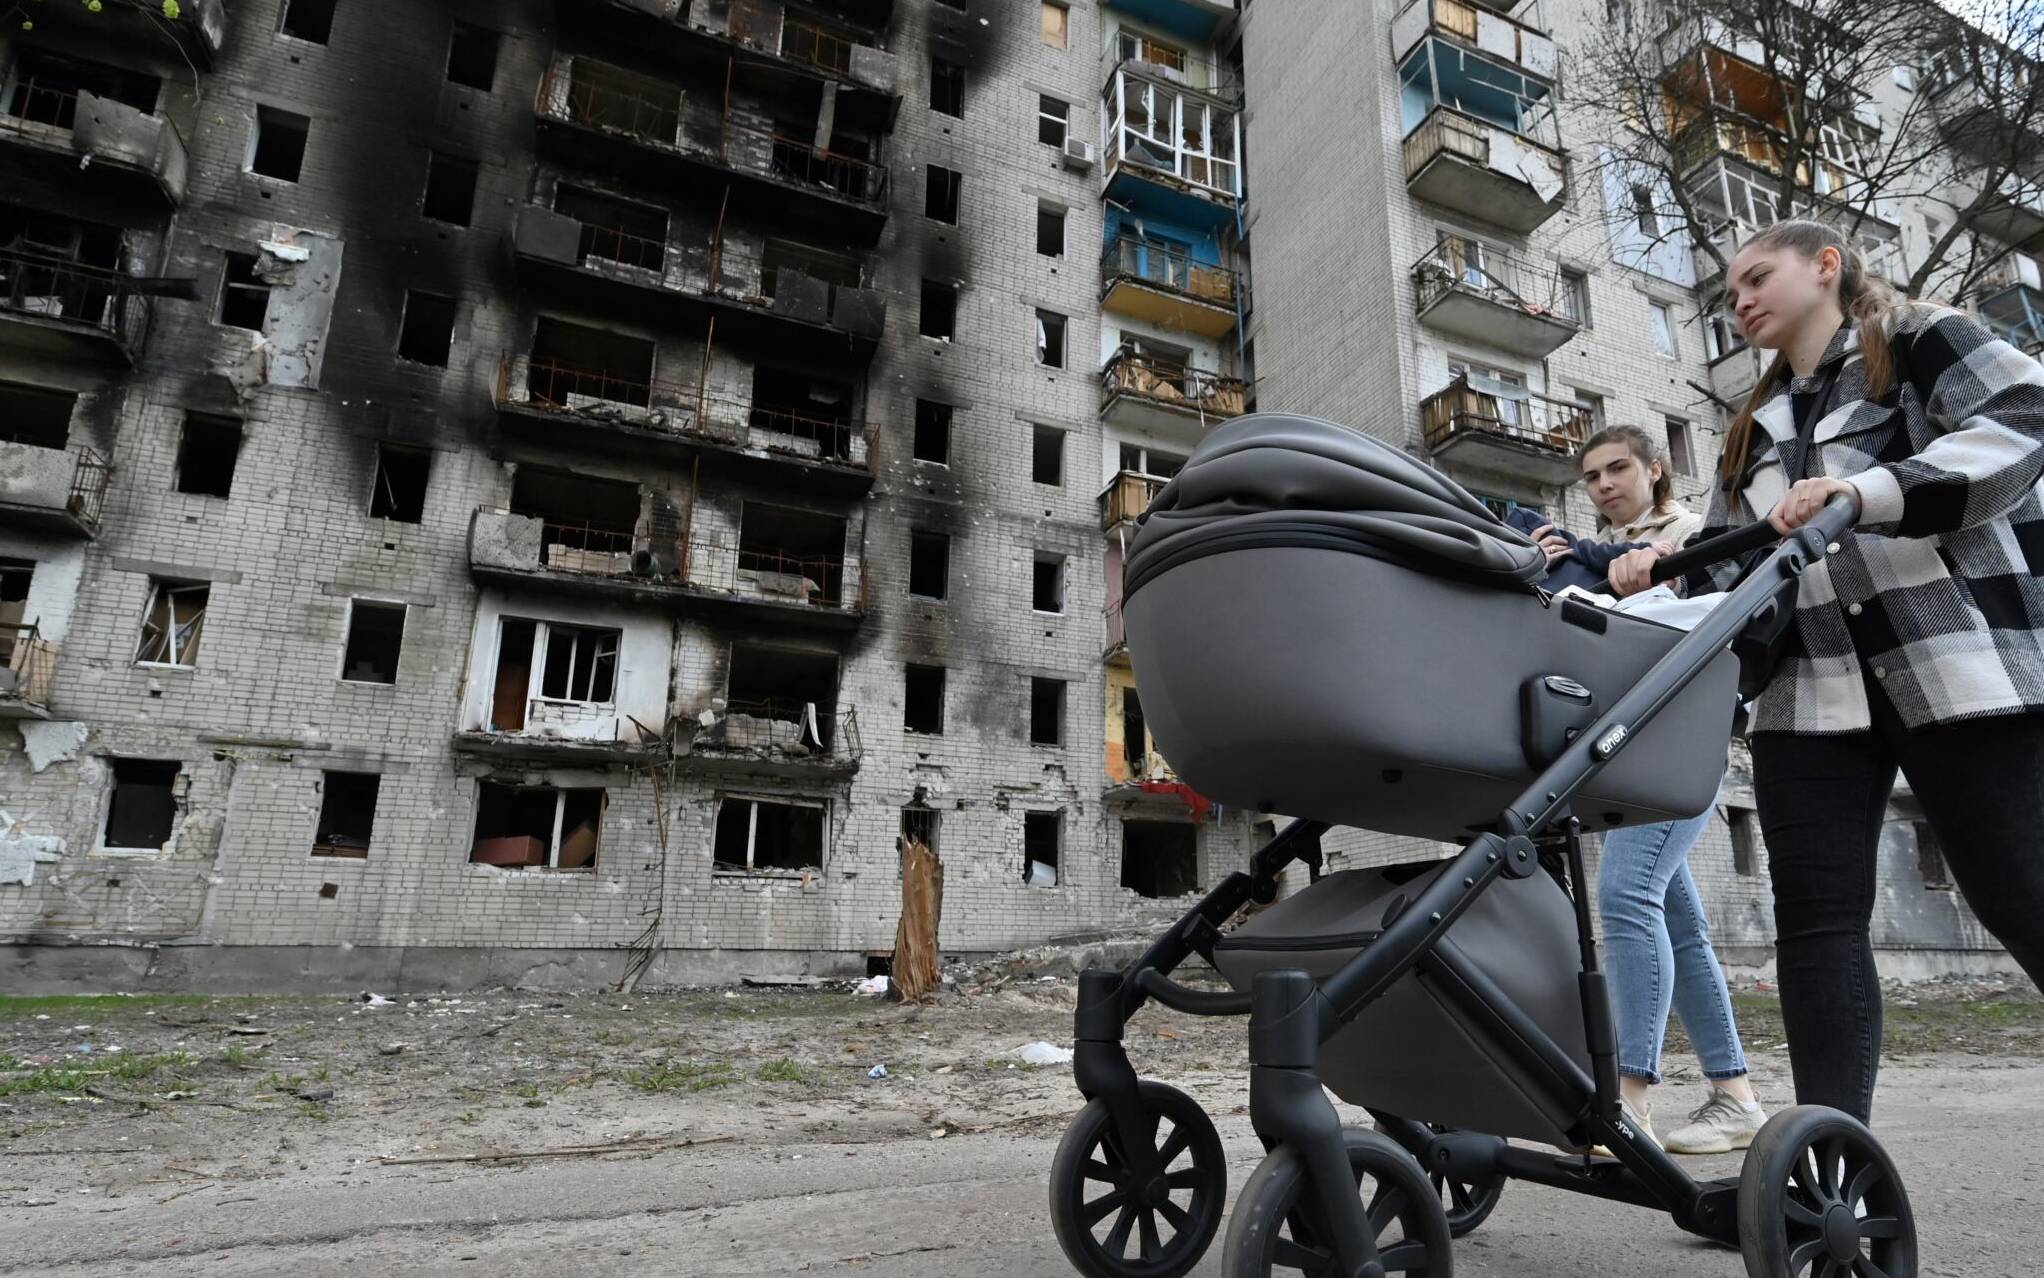 A woman pushes a pram past a heavily damaged residential building in the northern Ukrainian city of Chernigiv on May 3, 2022, amid the Russian invasion of Ukraine. - Russia's withdrawal from Chernigiv after a month-long assault left behind a devastated city that Ukraine will needs massive foreign aid, and many years of work, to restore. (Photo by Genya SAVILOV / AFP)